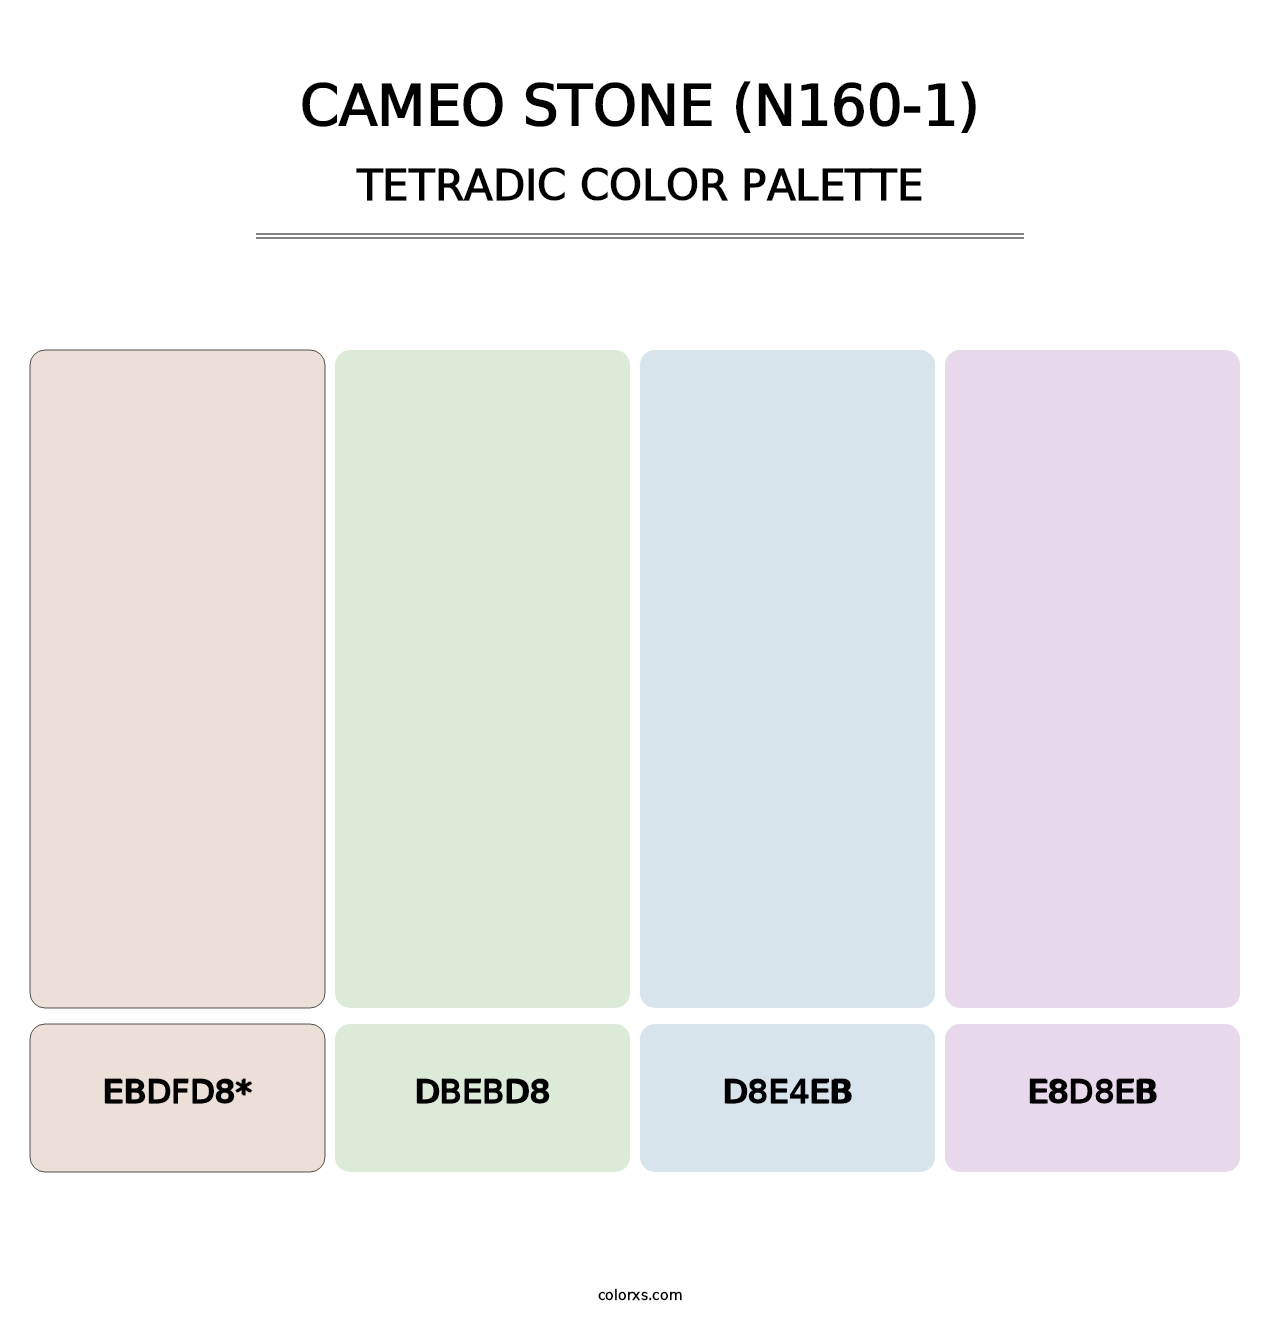 Cameo Stone (N160-1) - Tetradic Color Palette